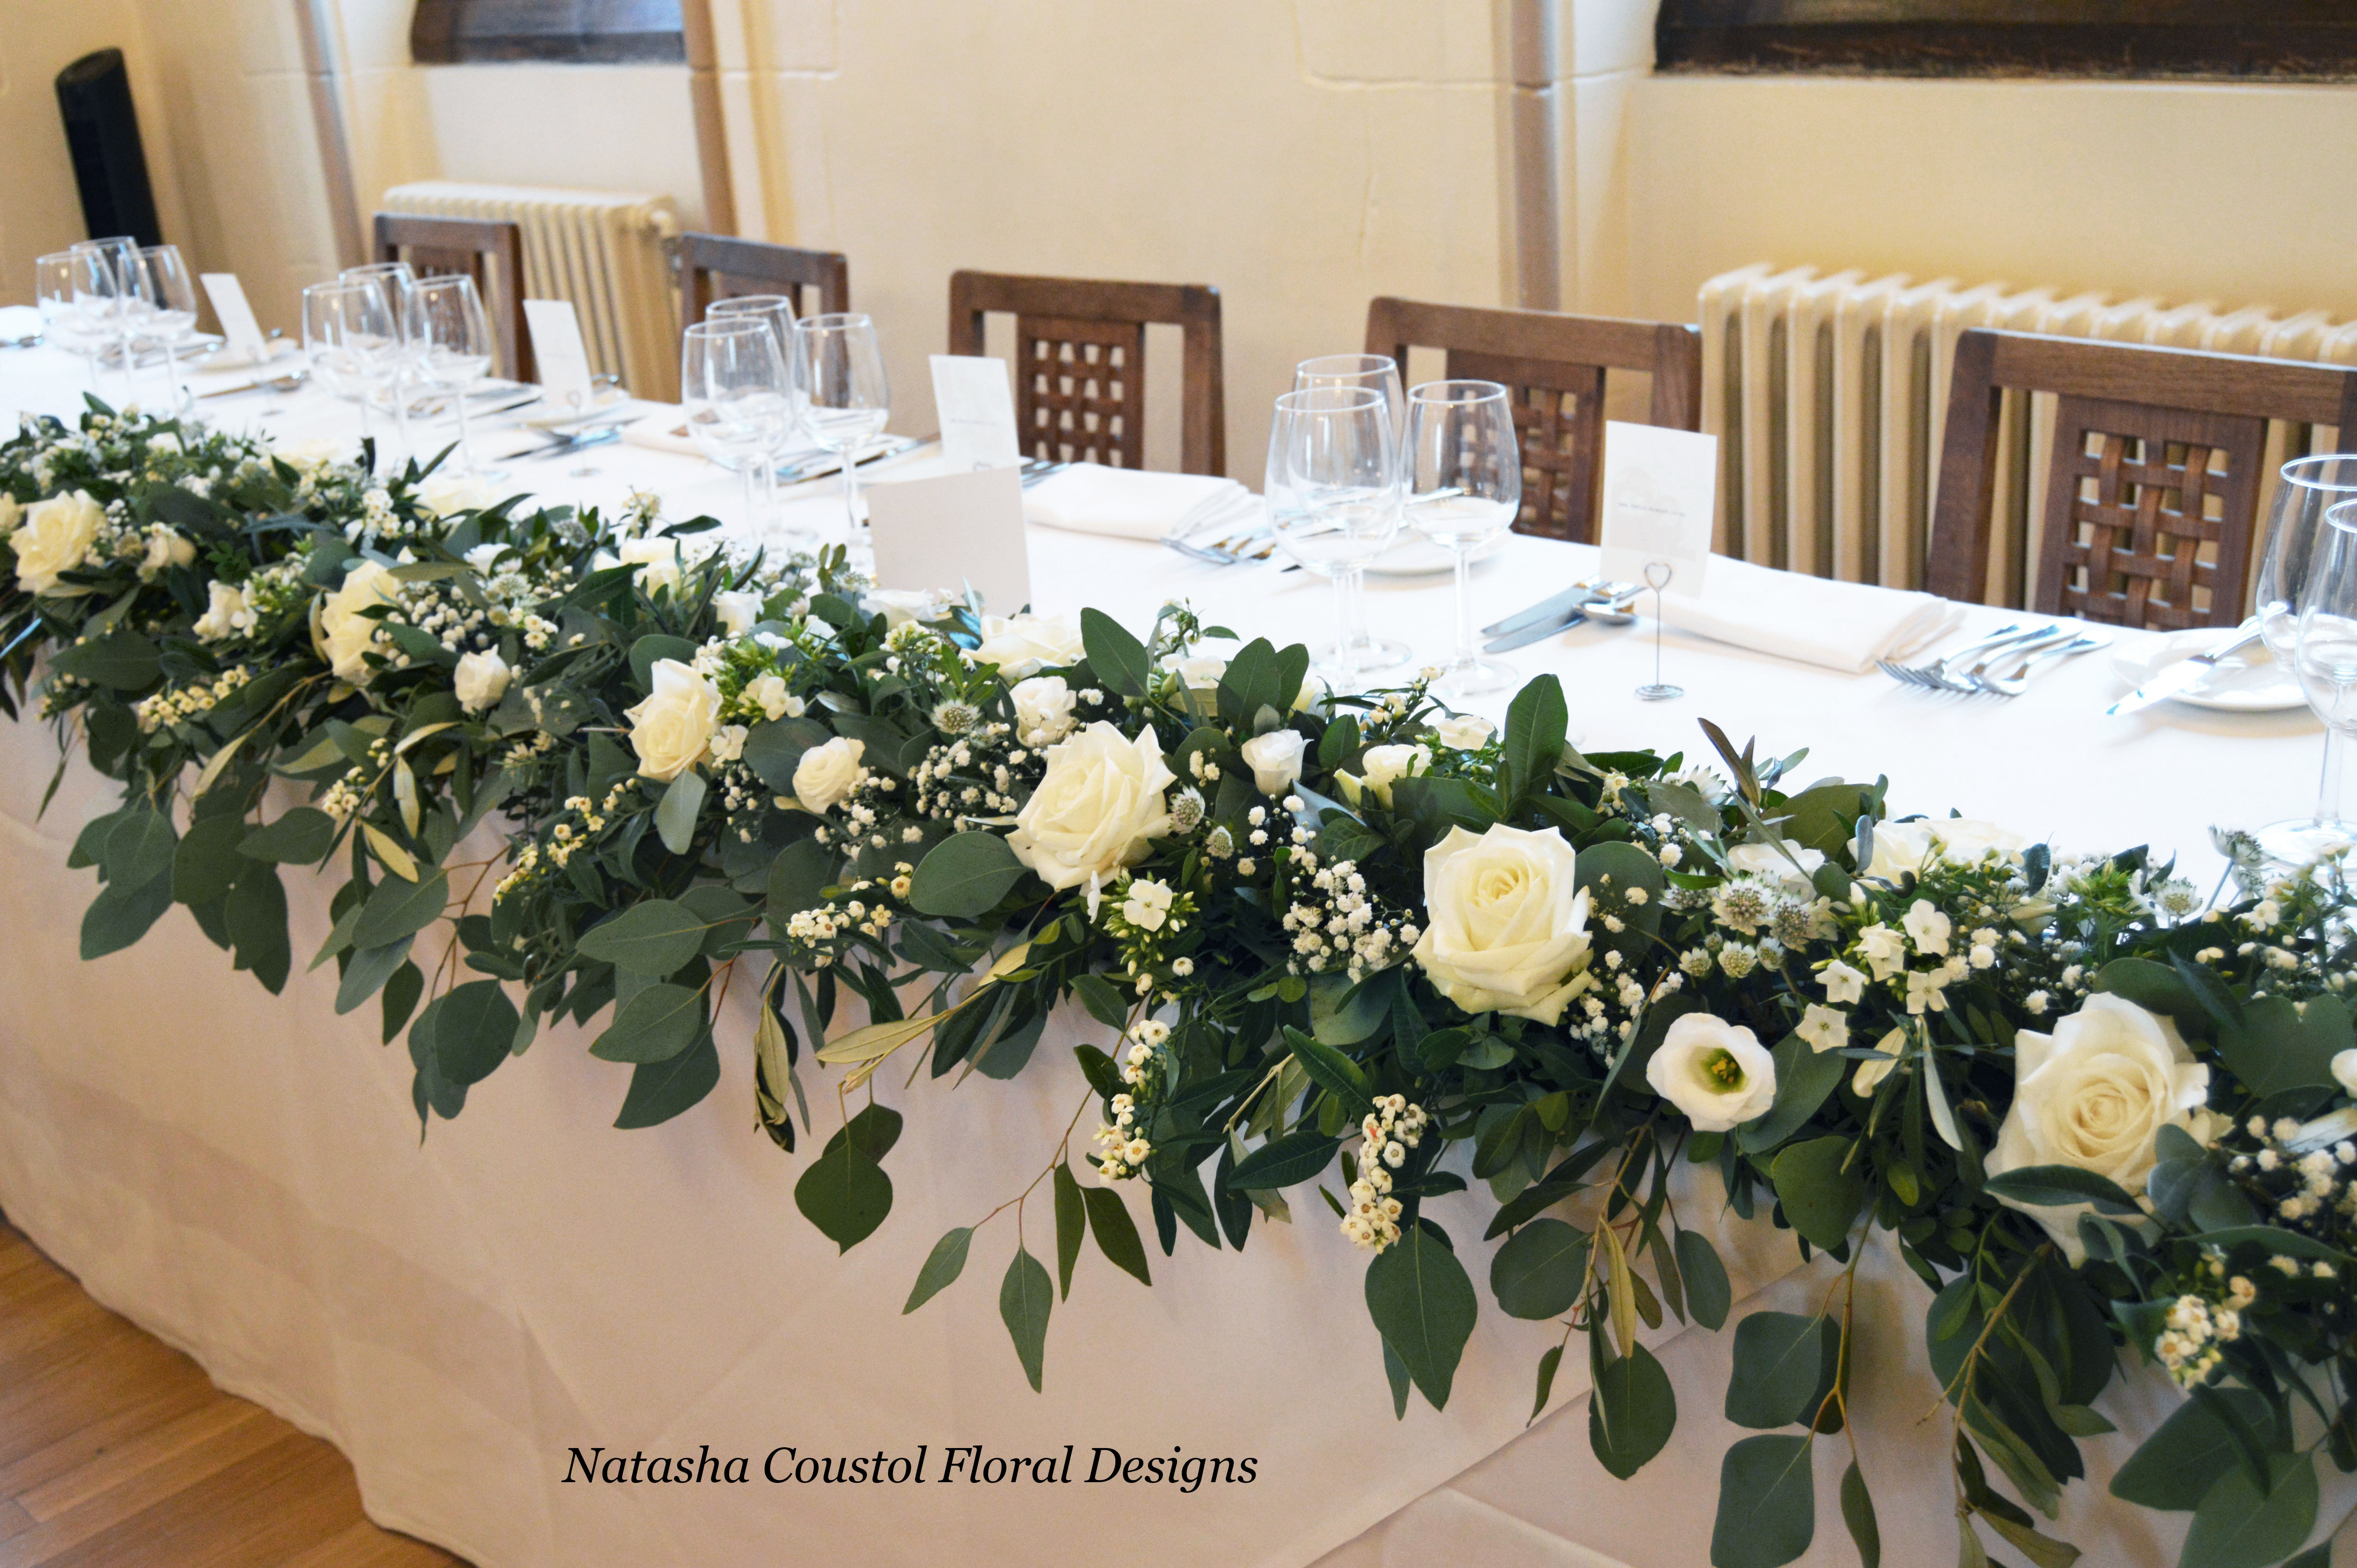 top-table-runner-wedding-flowers-trailing-greenery-eucalyptus-white-copy Grid No Space 5 Columns